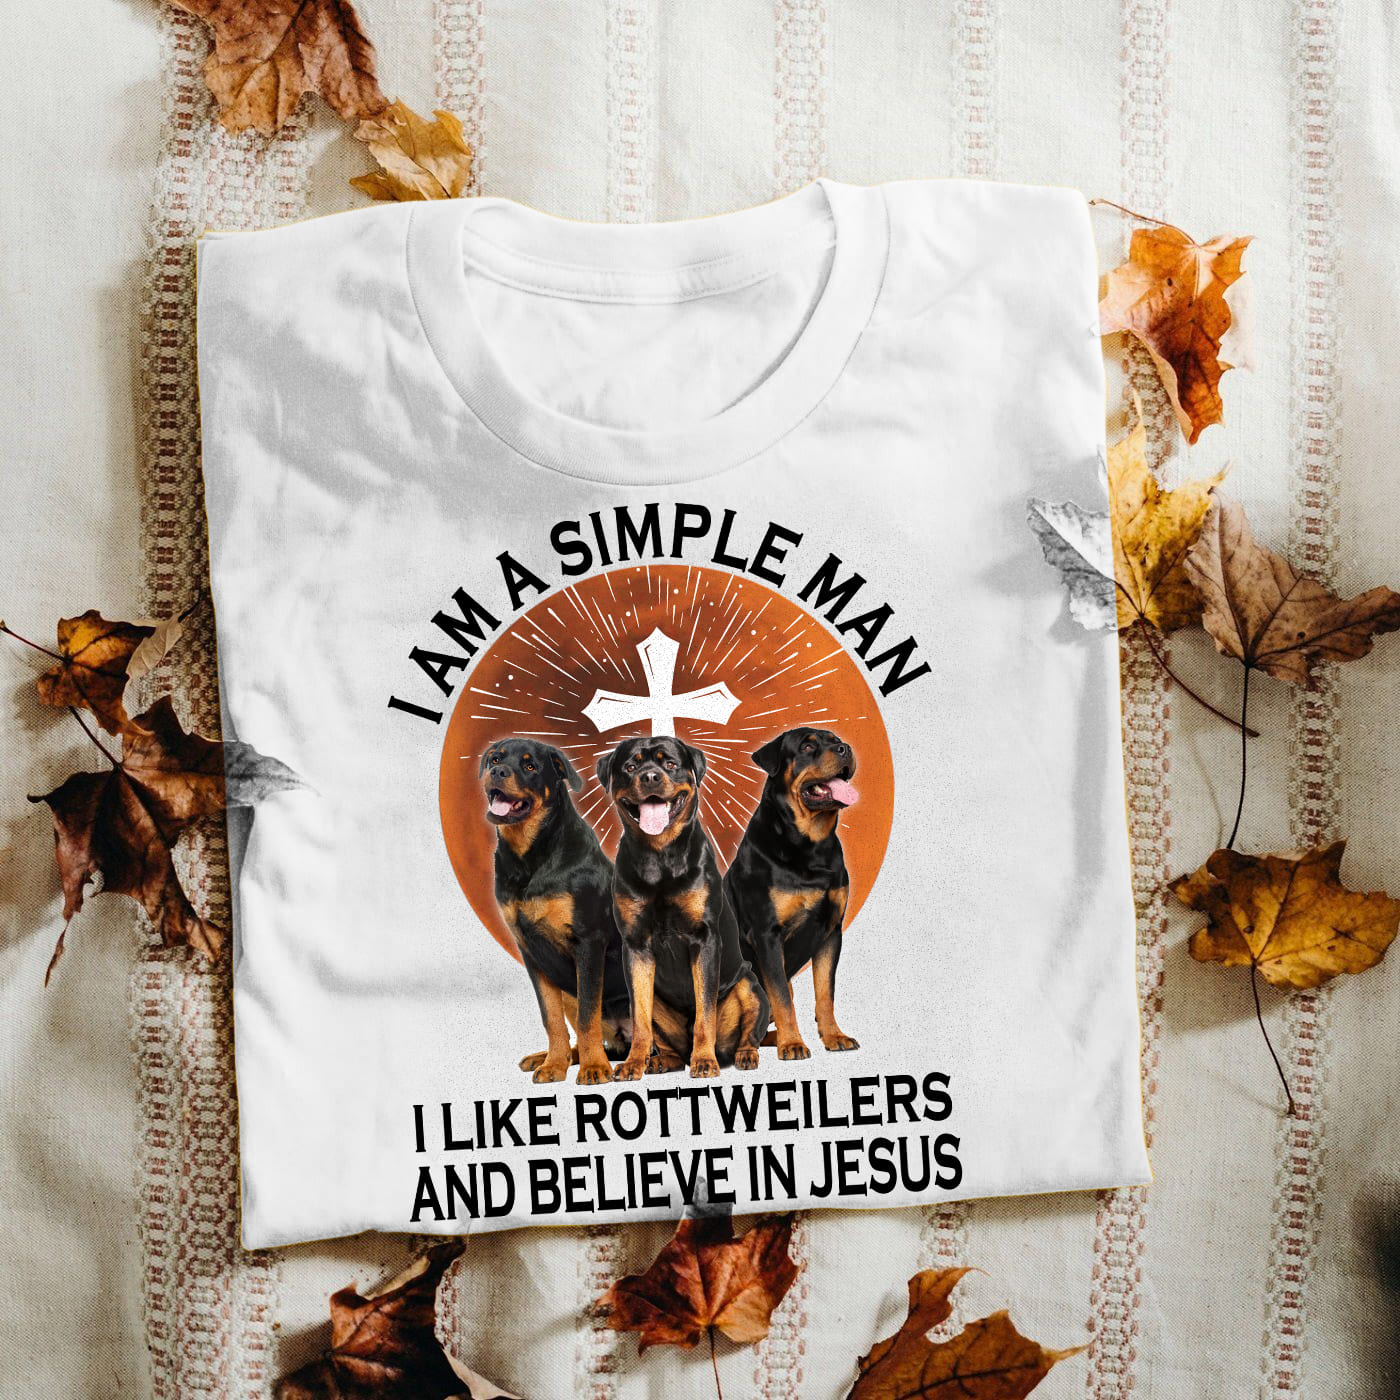 Rottweiler - I'm a simple man, I like Rottweilers and believe in Jesus Rottweiler White Apparel